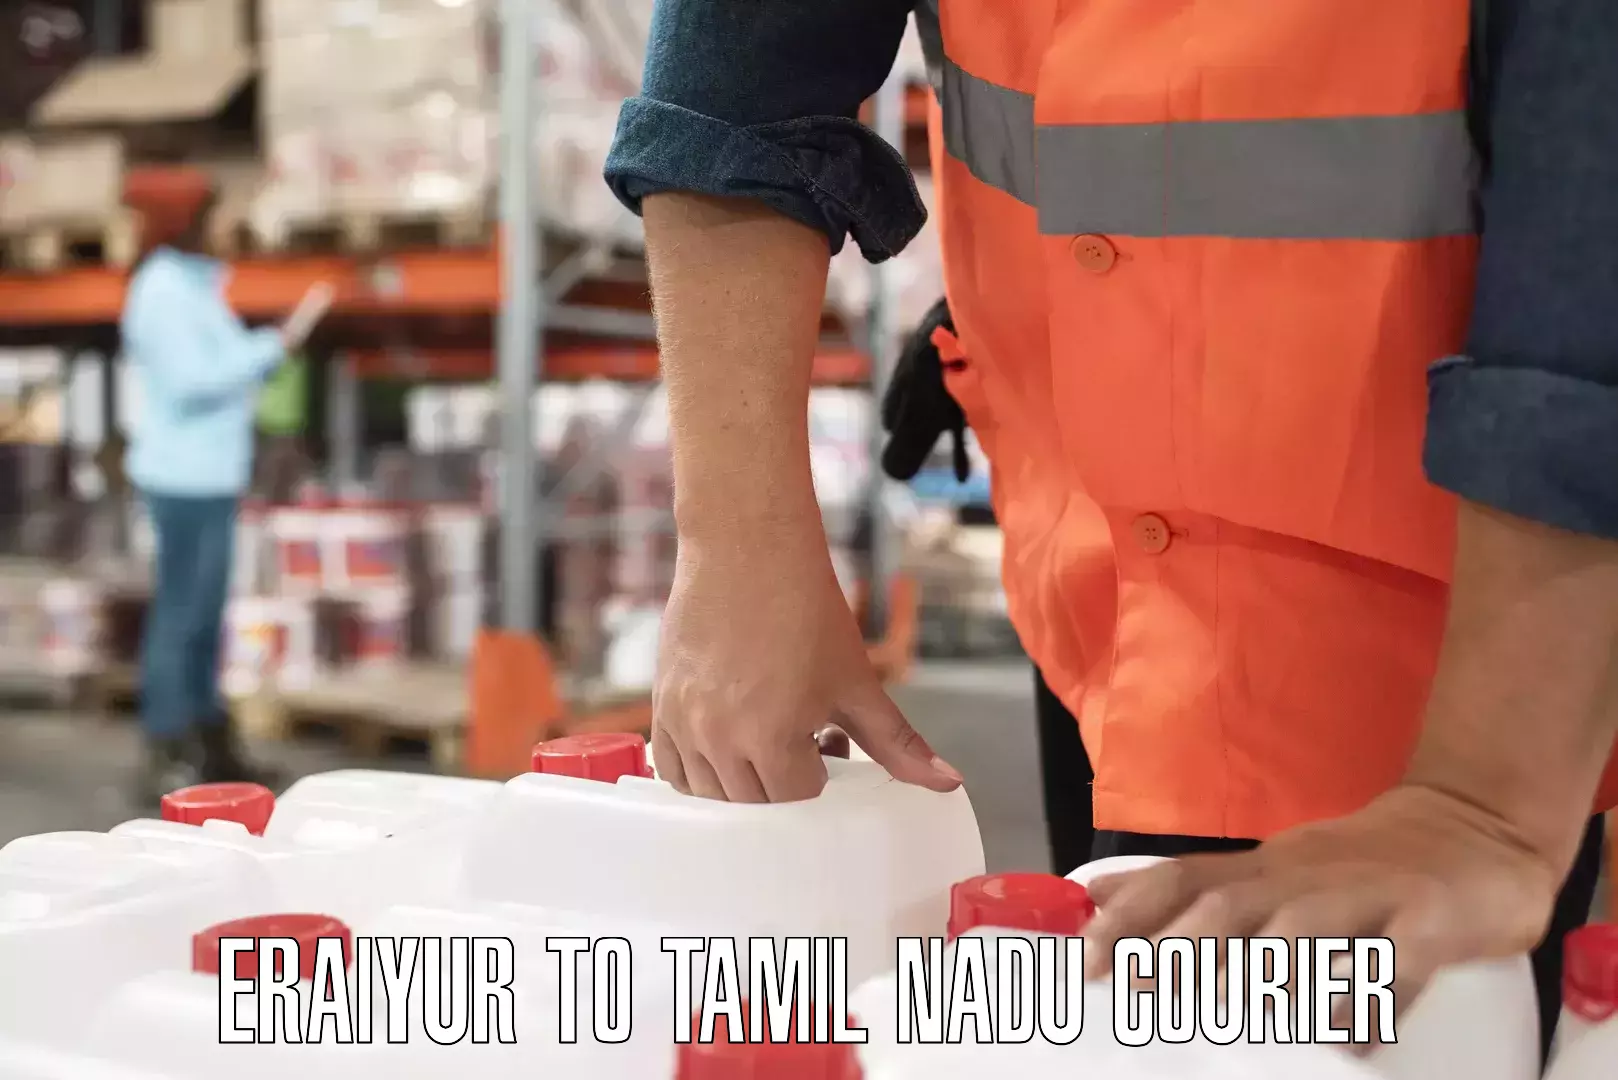 Track and trace shipping Eraiyur to Tamil Nadu